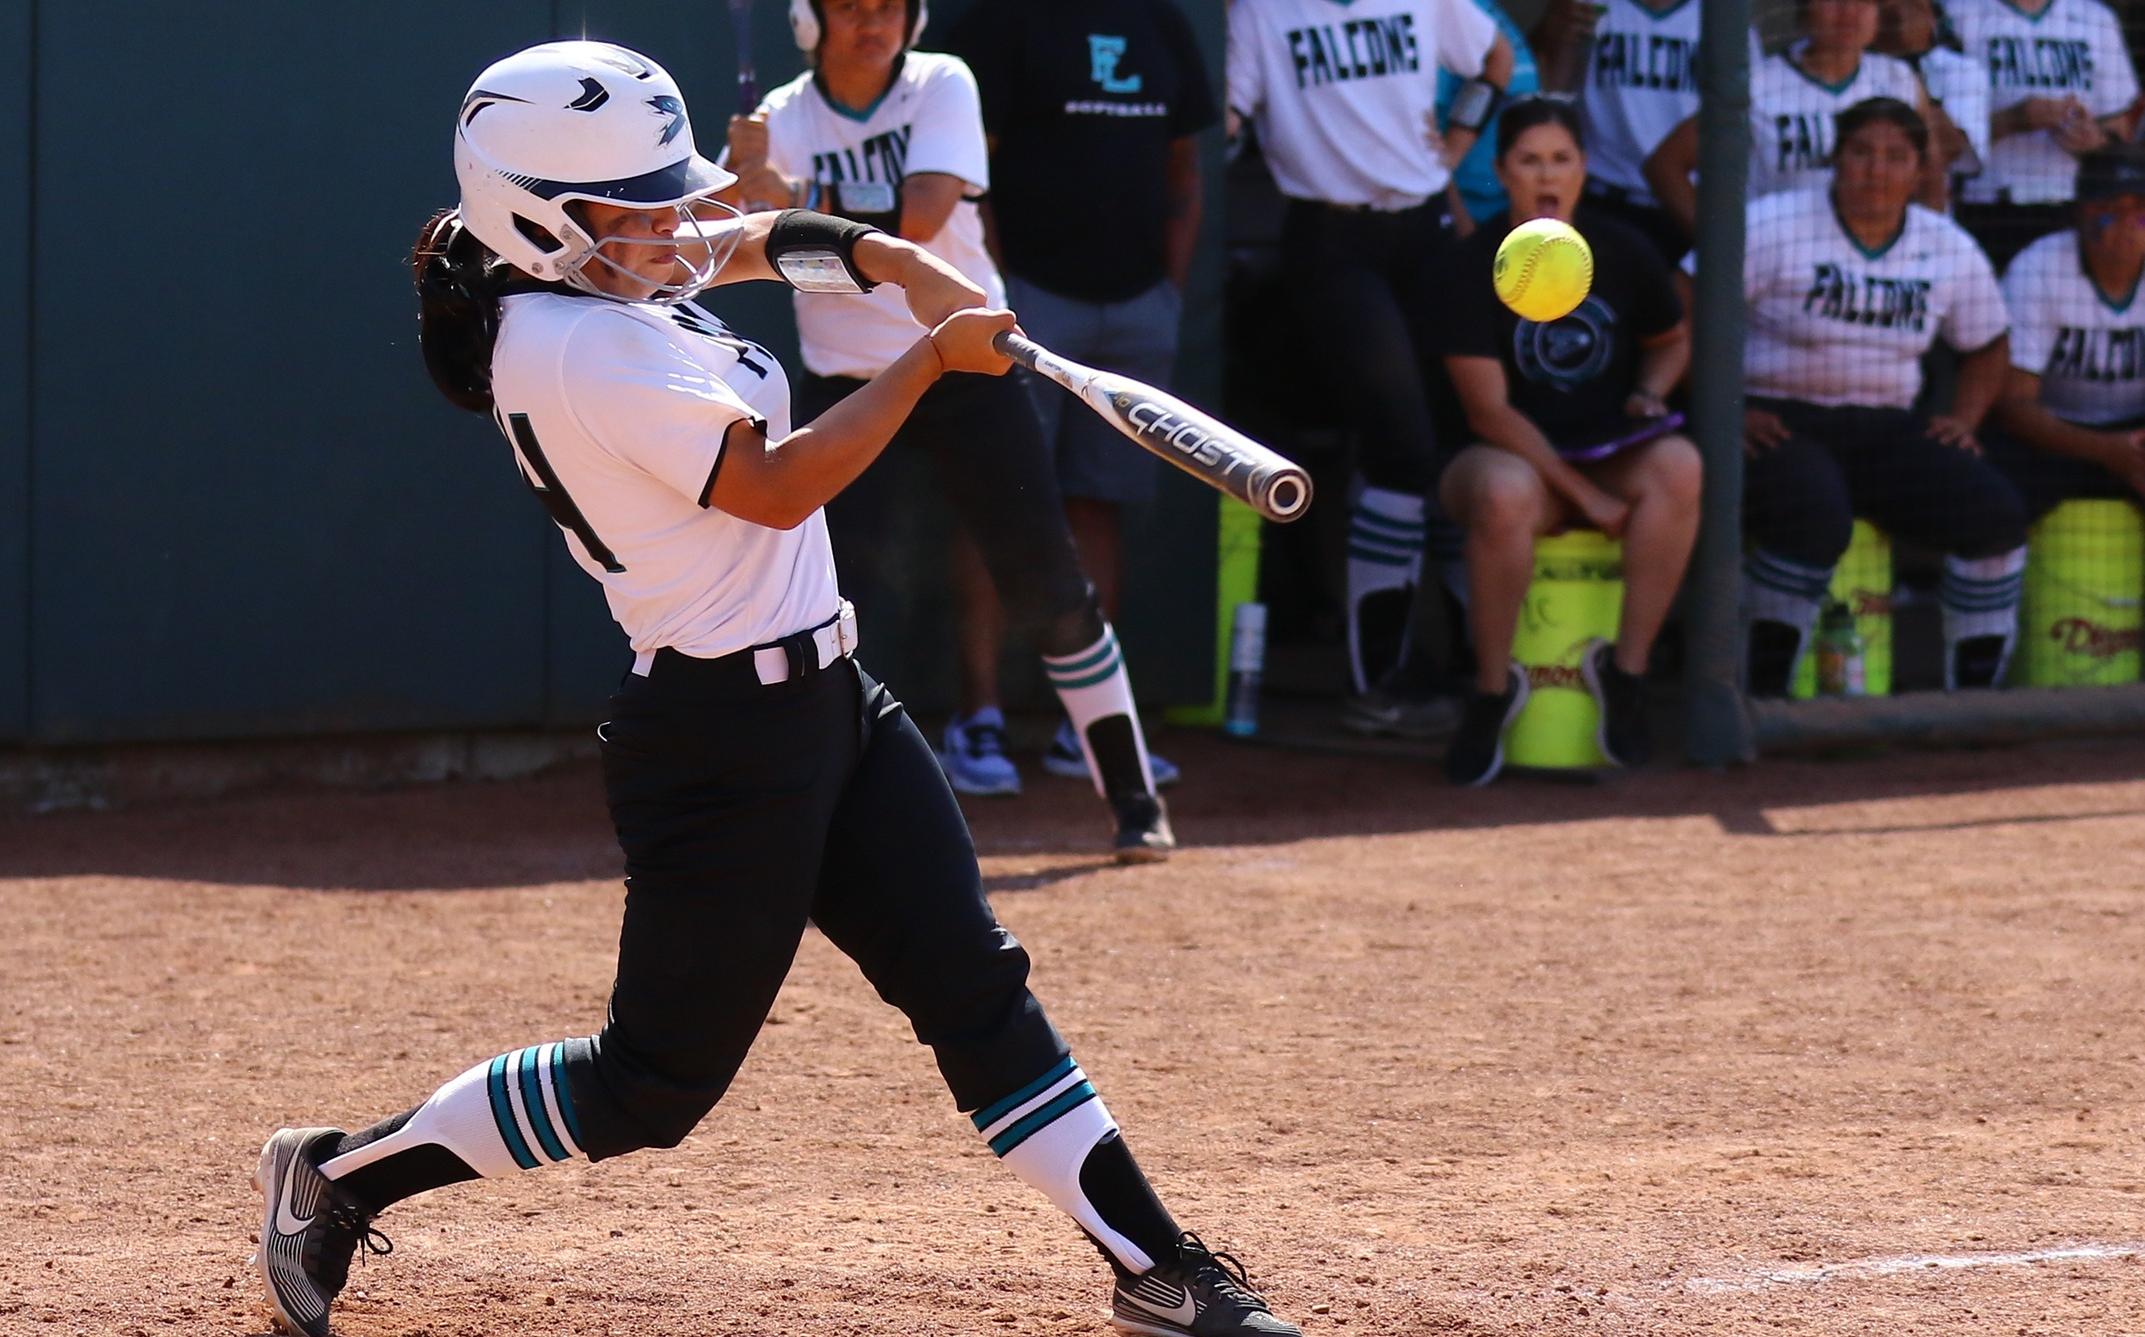 4-run sixth inning propels Falcons to win over Merced